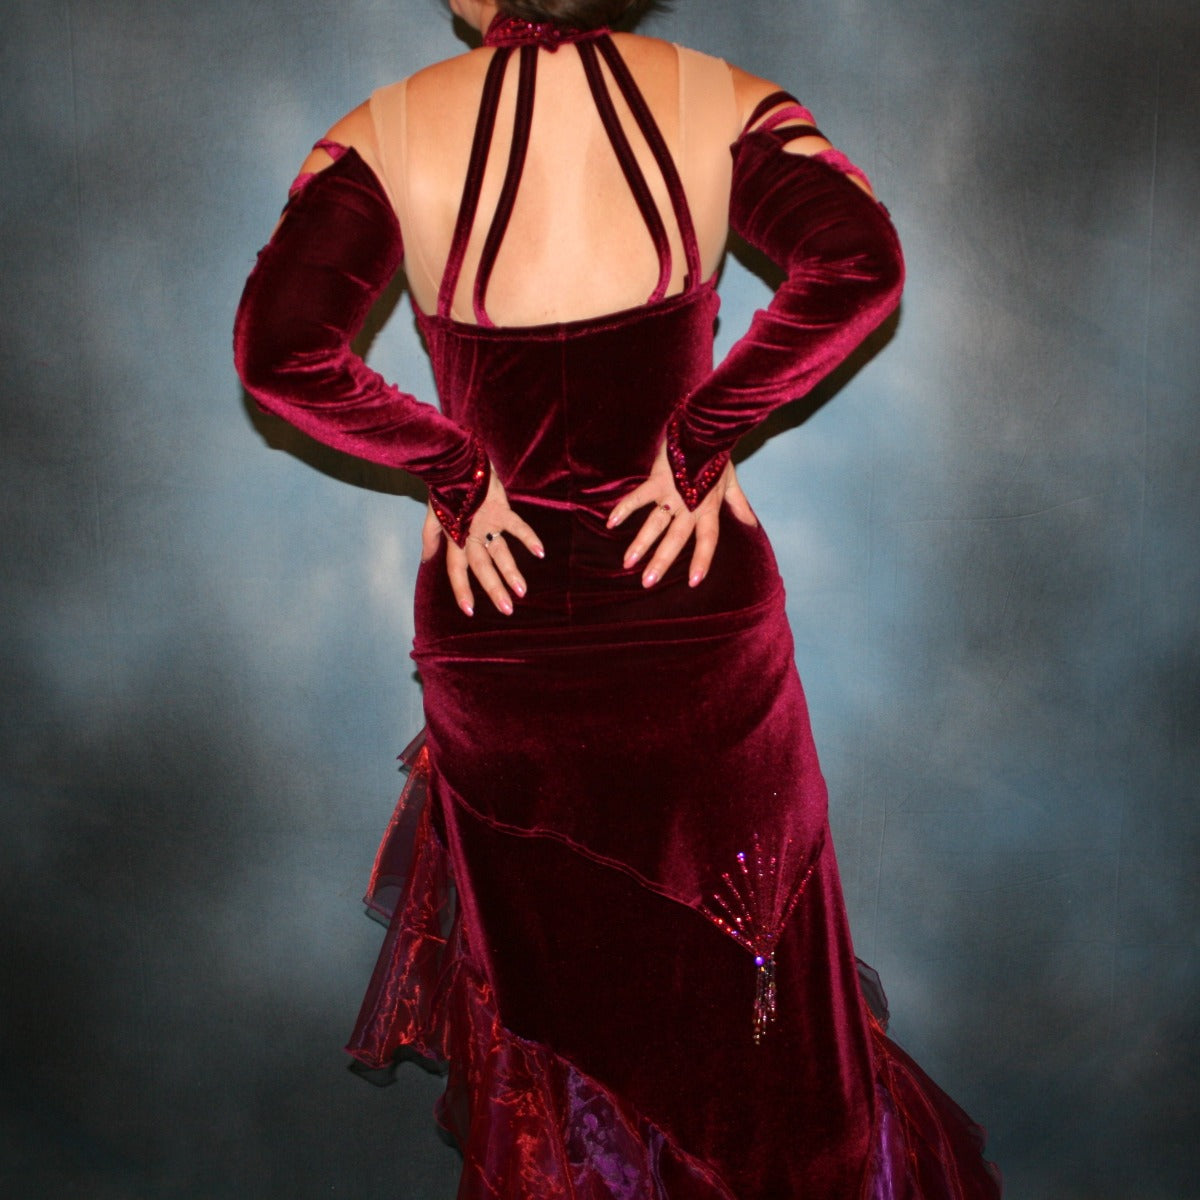 Crystal's Creations back view of Burgundy tango dress created in luxurious burgundy stretch velvet, with flounces of iridescent burgundy organza, adorned with fuchsia Swarovski rhinestones, hip sash has Swarovski hand beading as well, just recently embellished more.